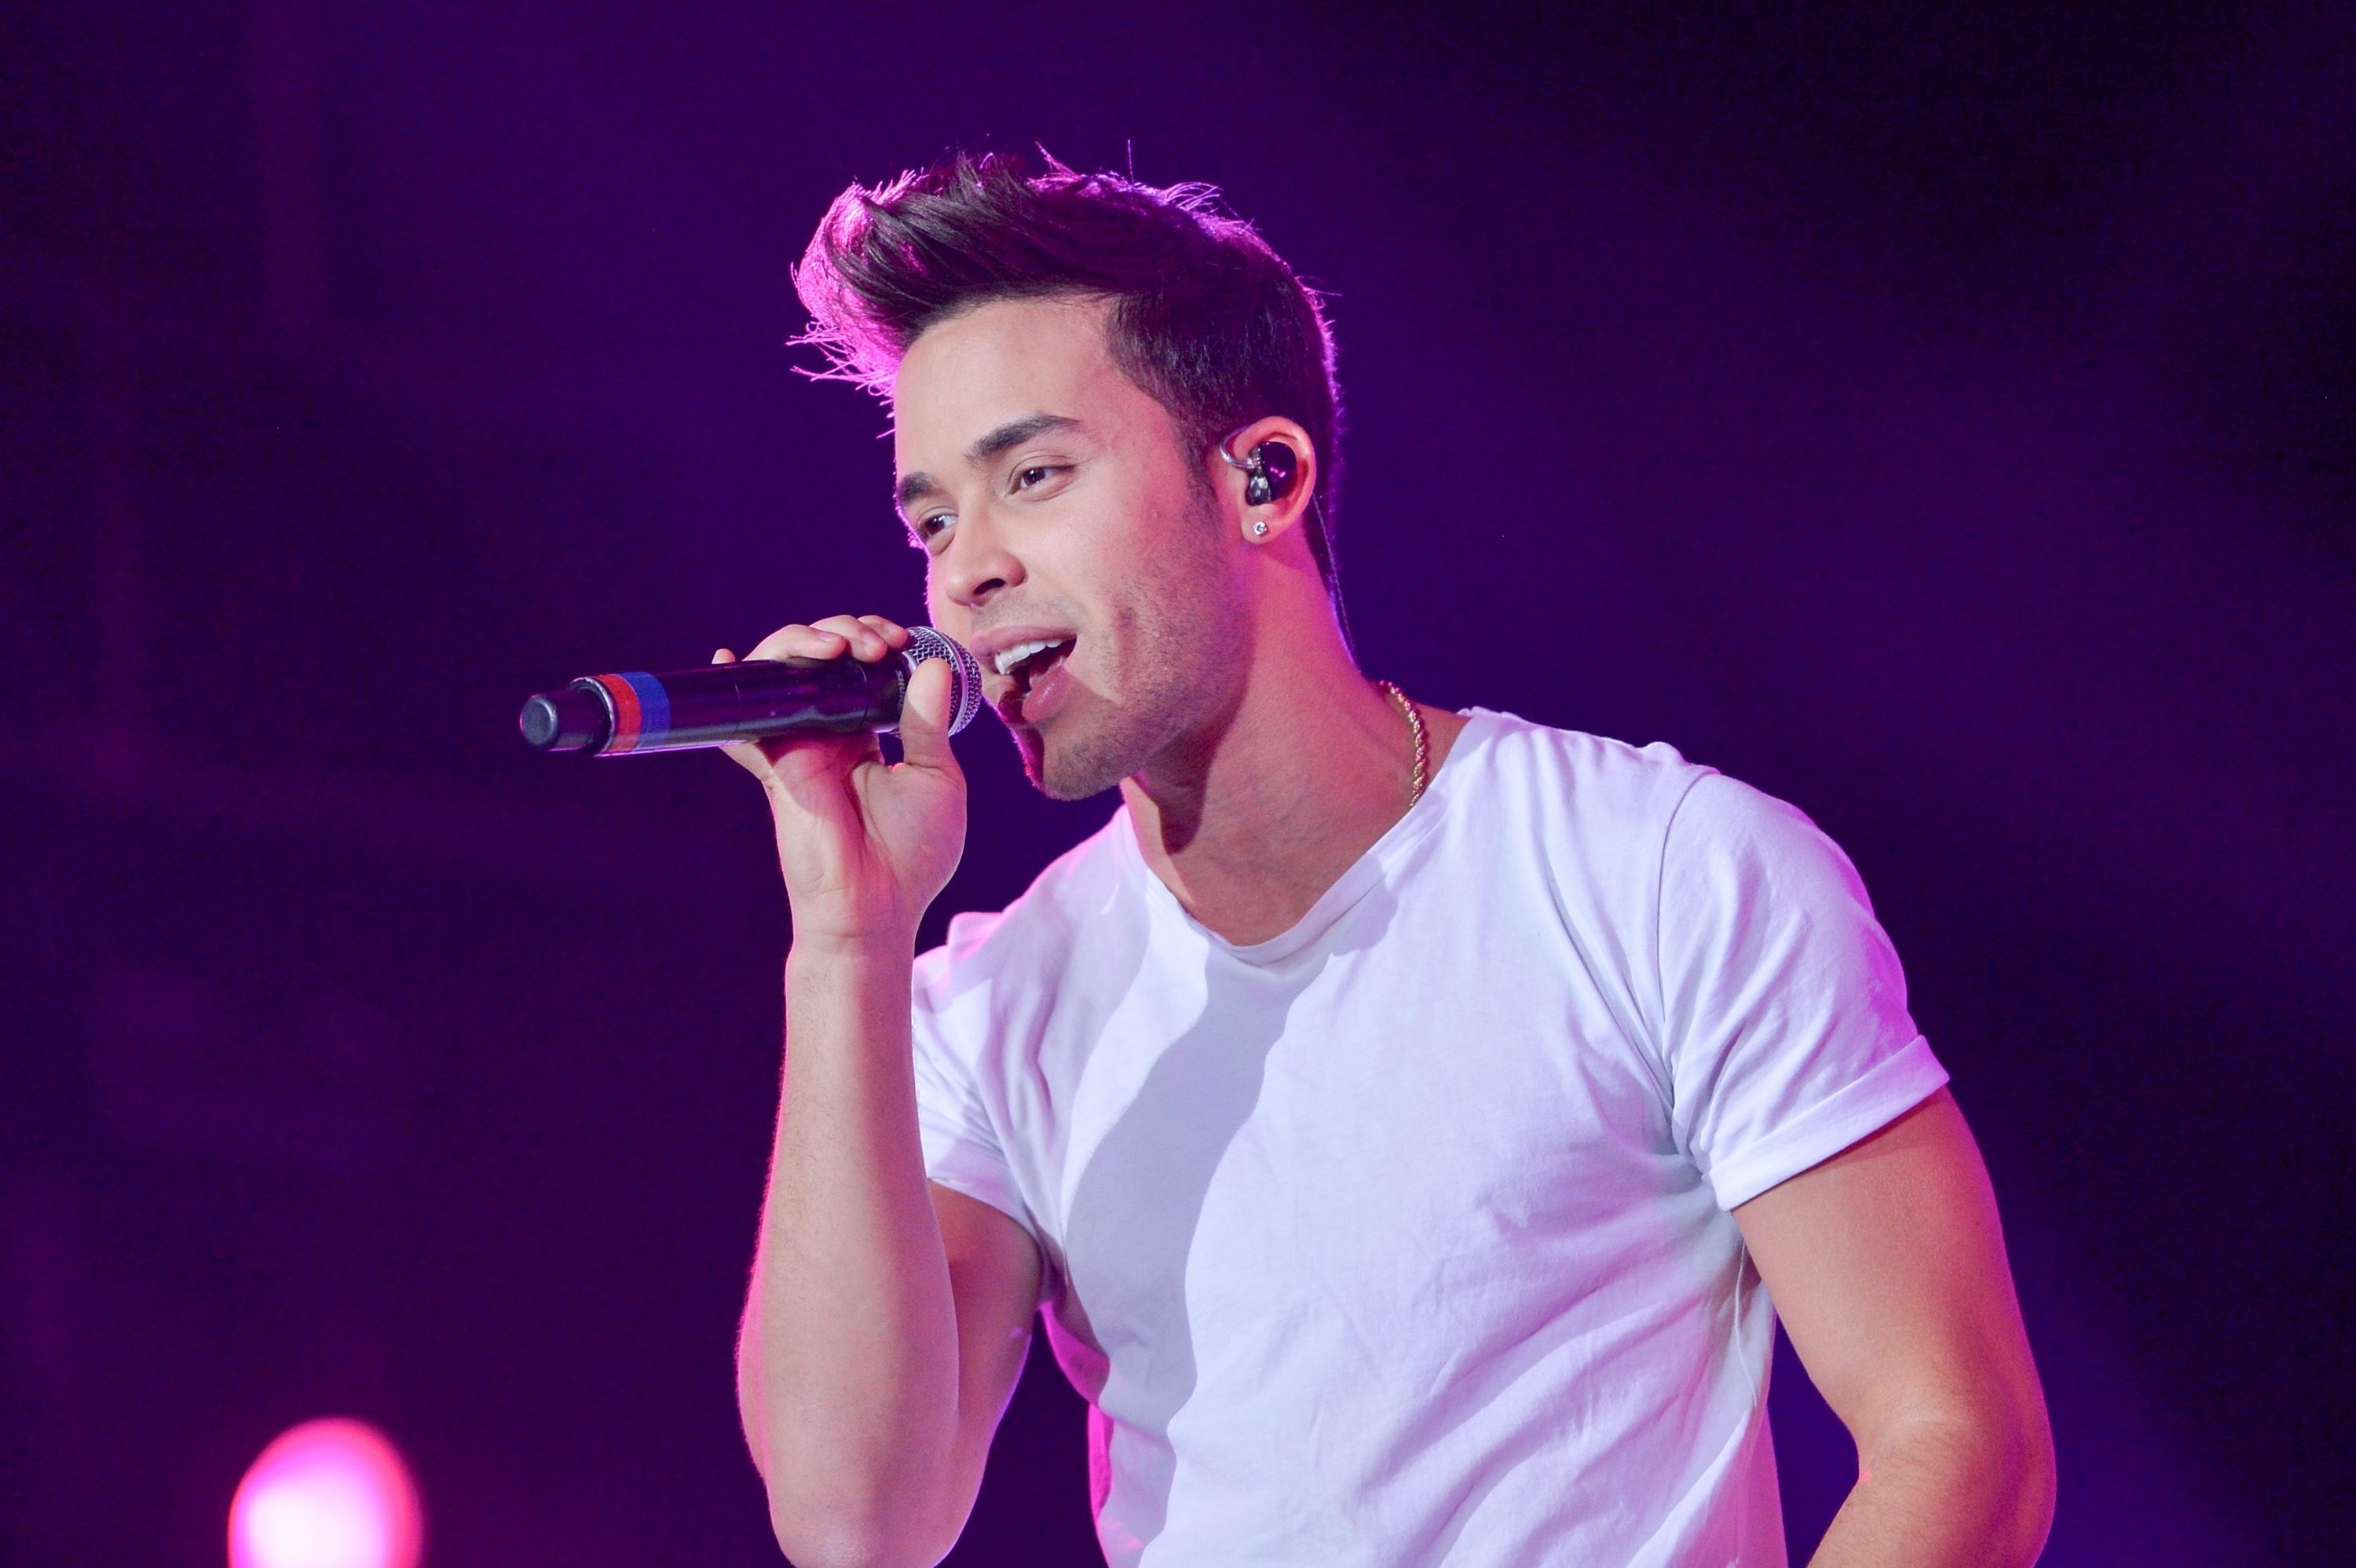 Prince Royce, Top free backgrounds, Latin music, Chart-topping hits, 3000x2000 HD Desktop